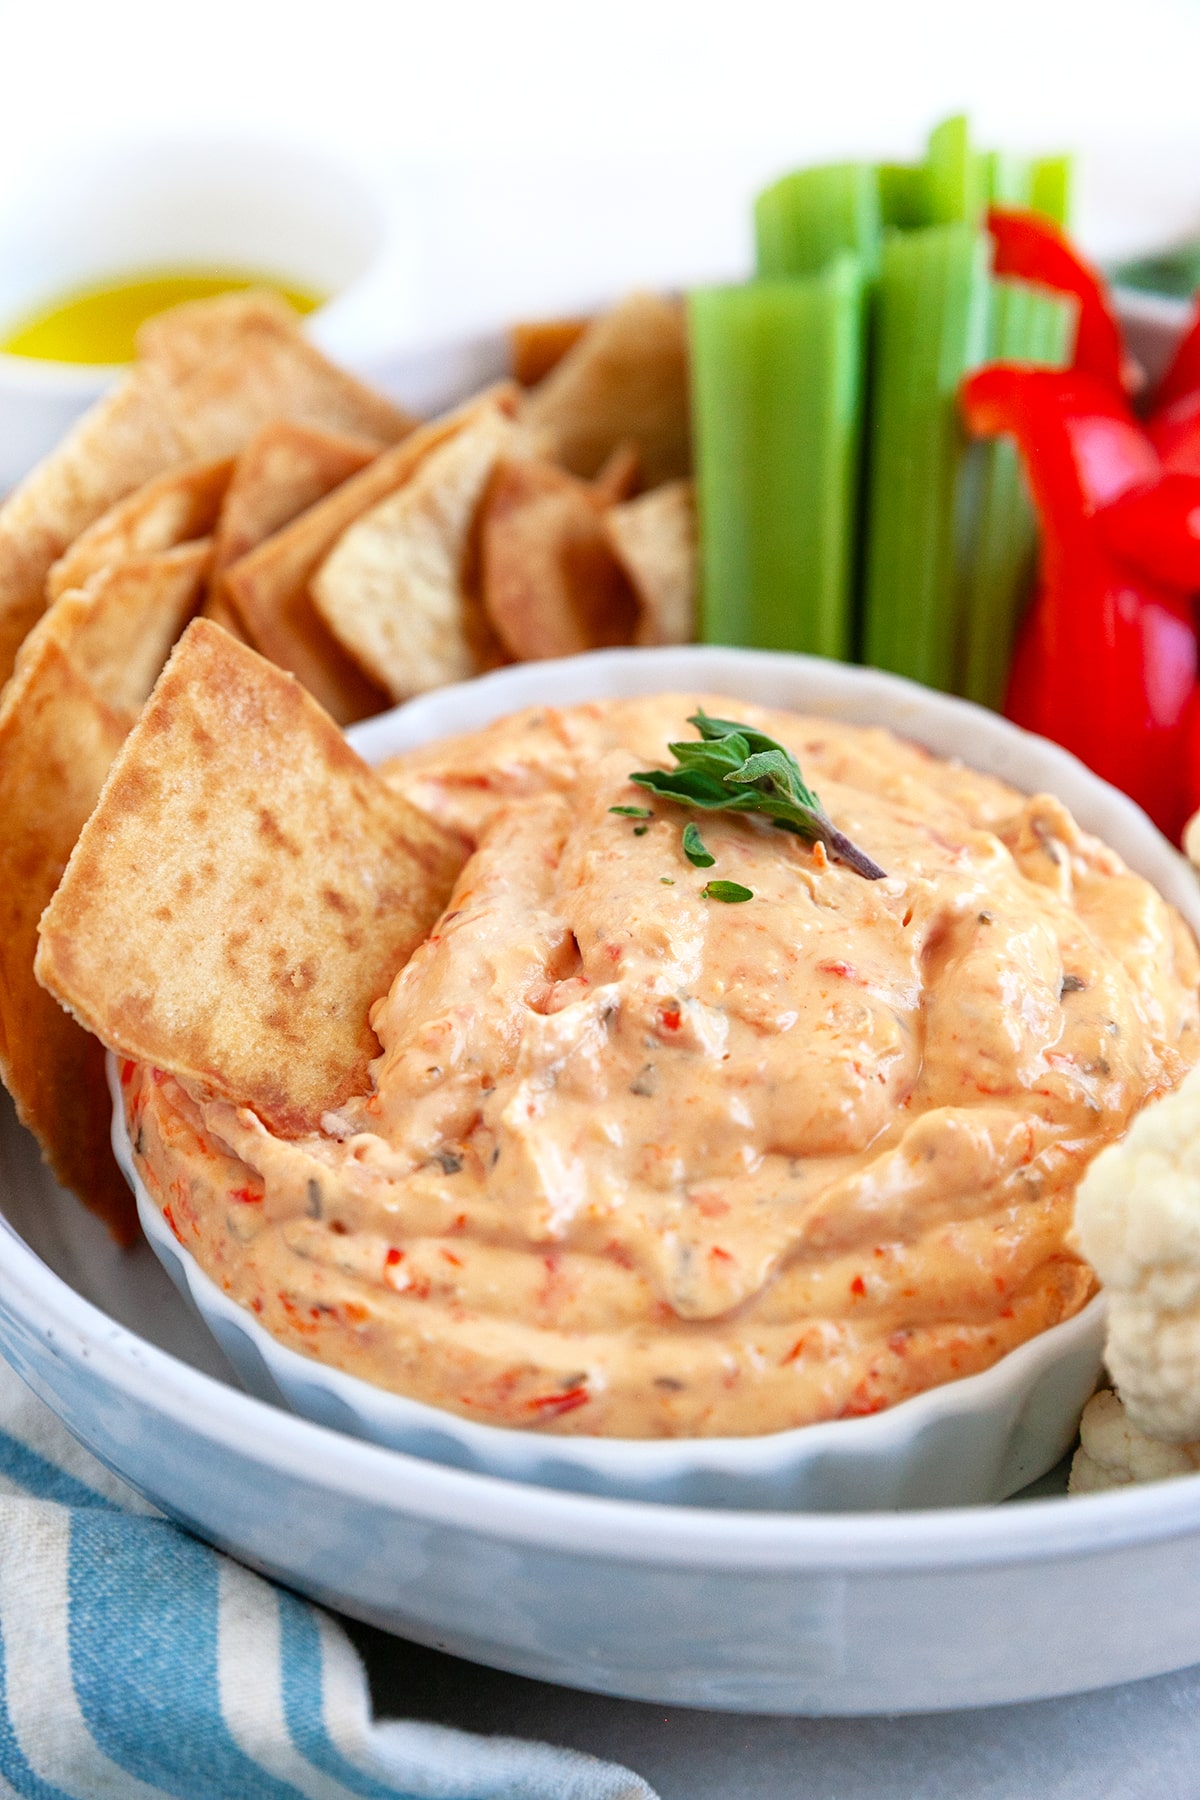 Feta Roasted Red Pepper Dip with pita chips and veggies. 